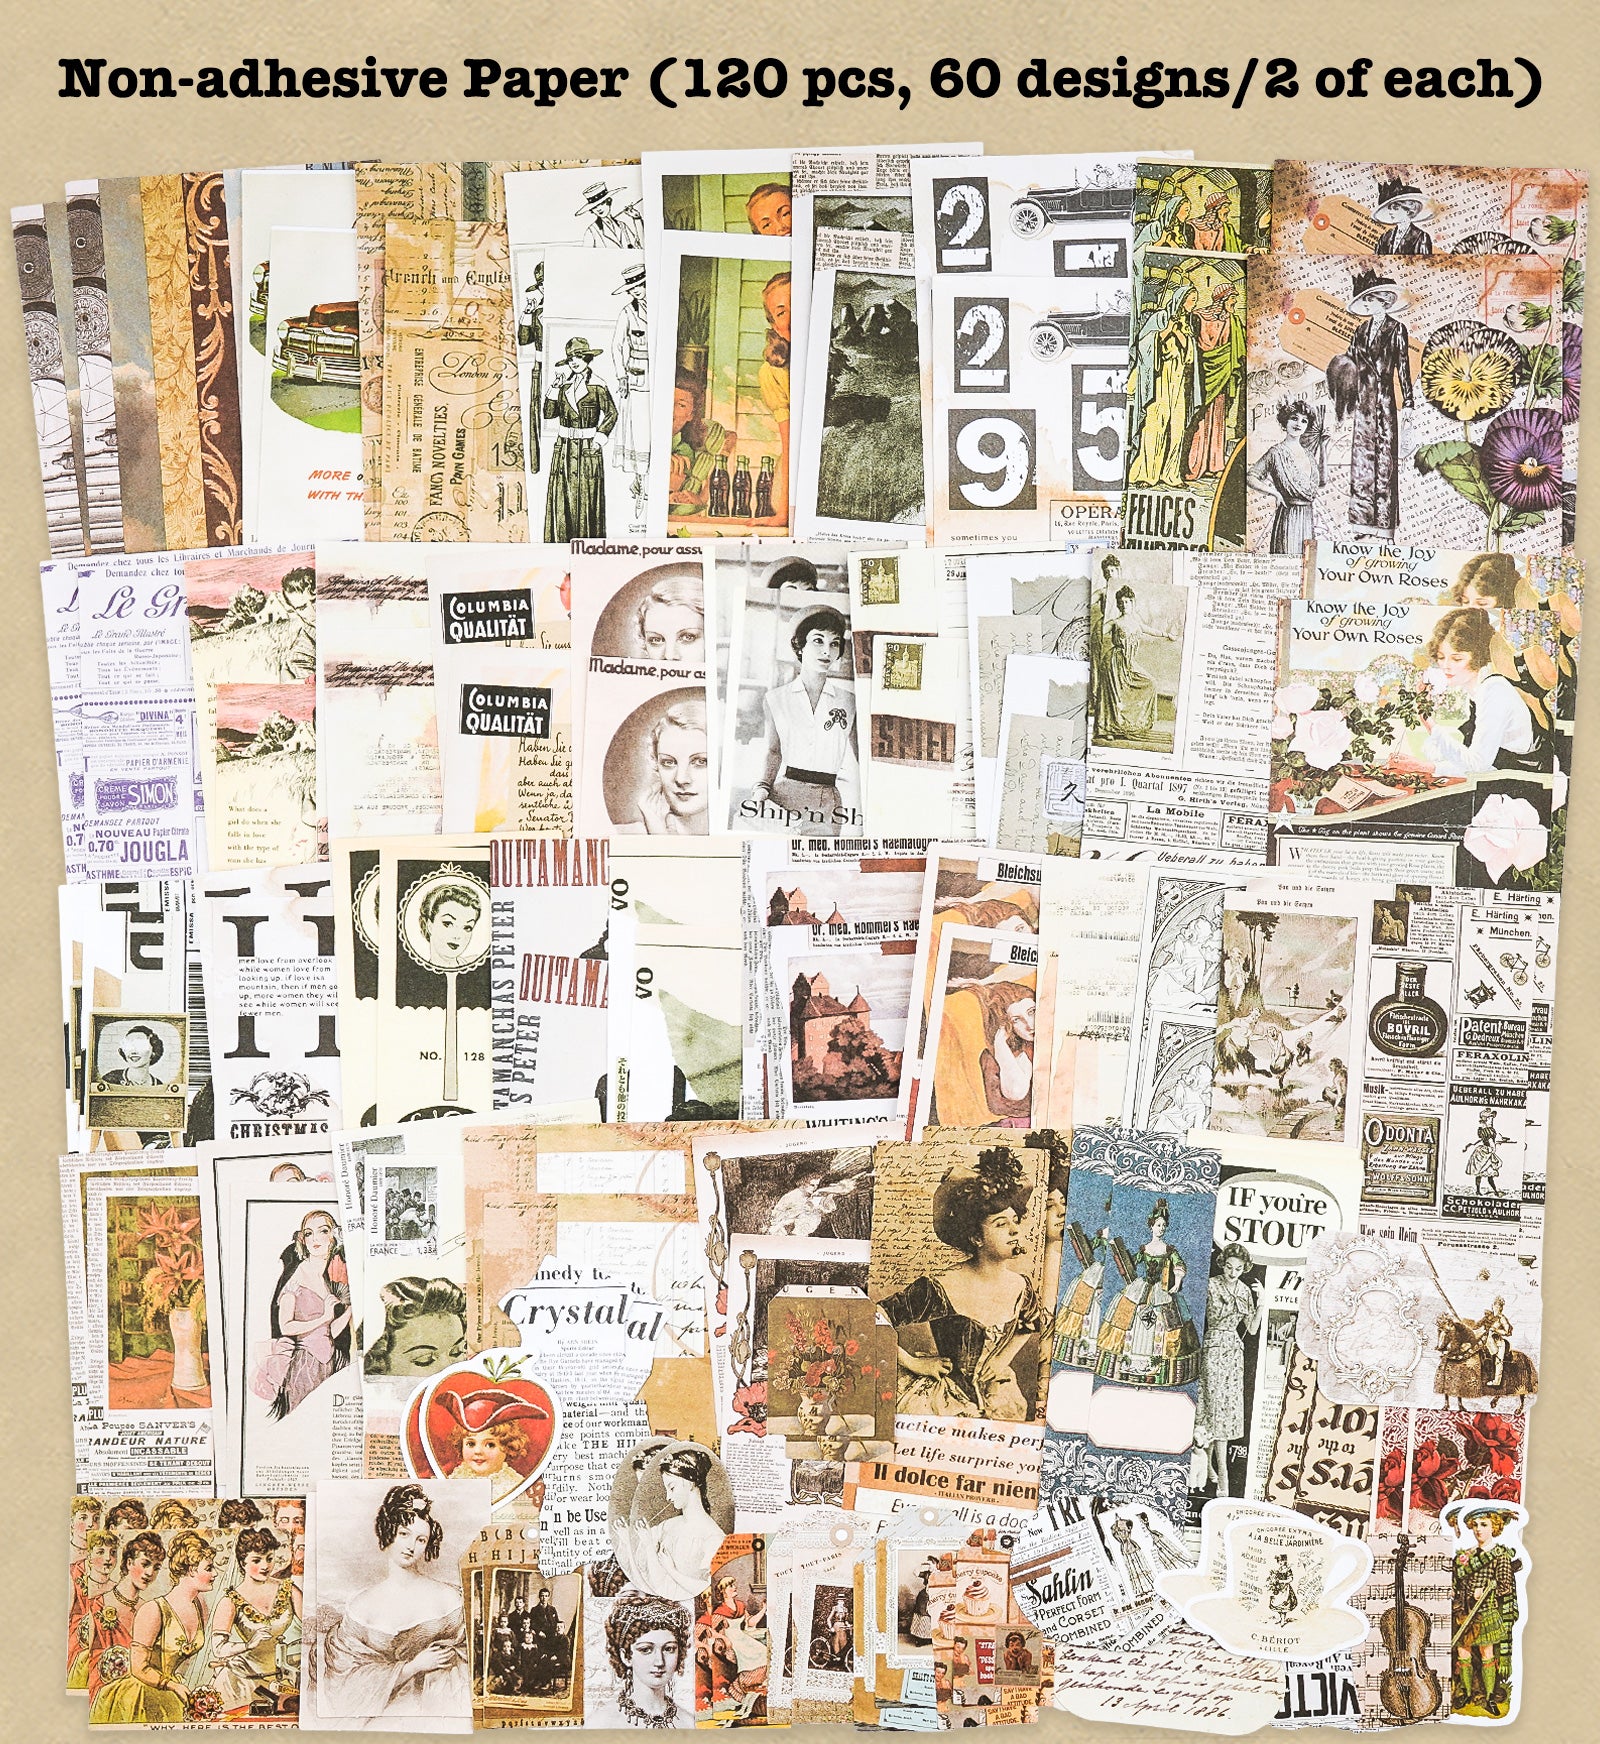 200 Pieces Vintage Scrapbook Supplies Pack for Junk Journal Planners DIY Paper Stickers Vintage Ephemera Pack Decoupage, Other